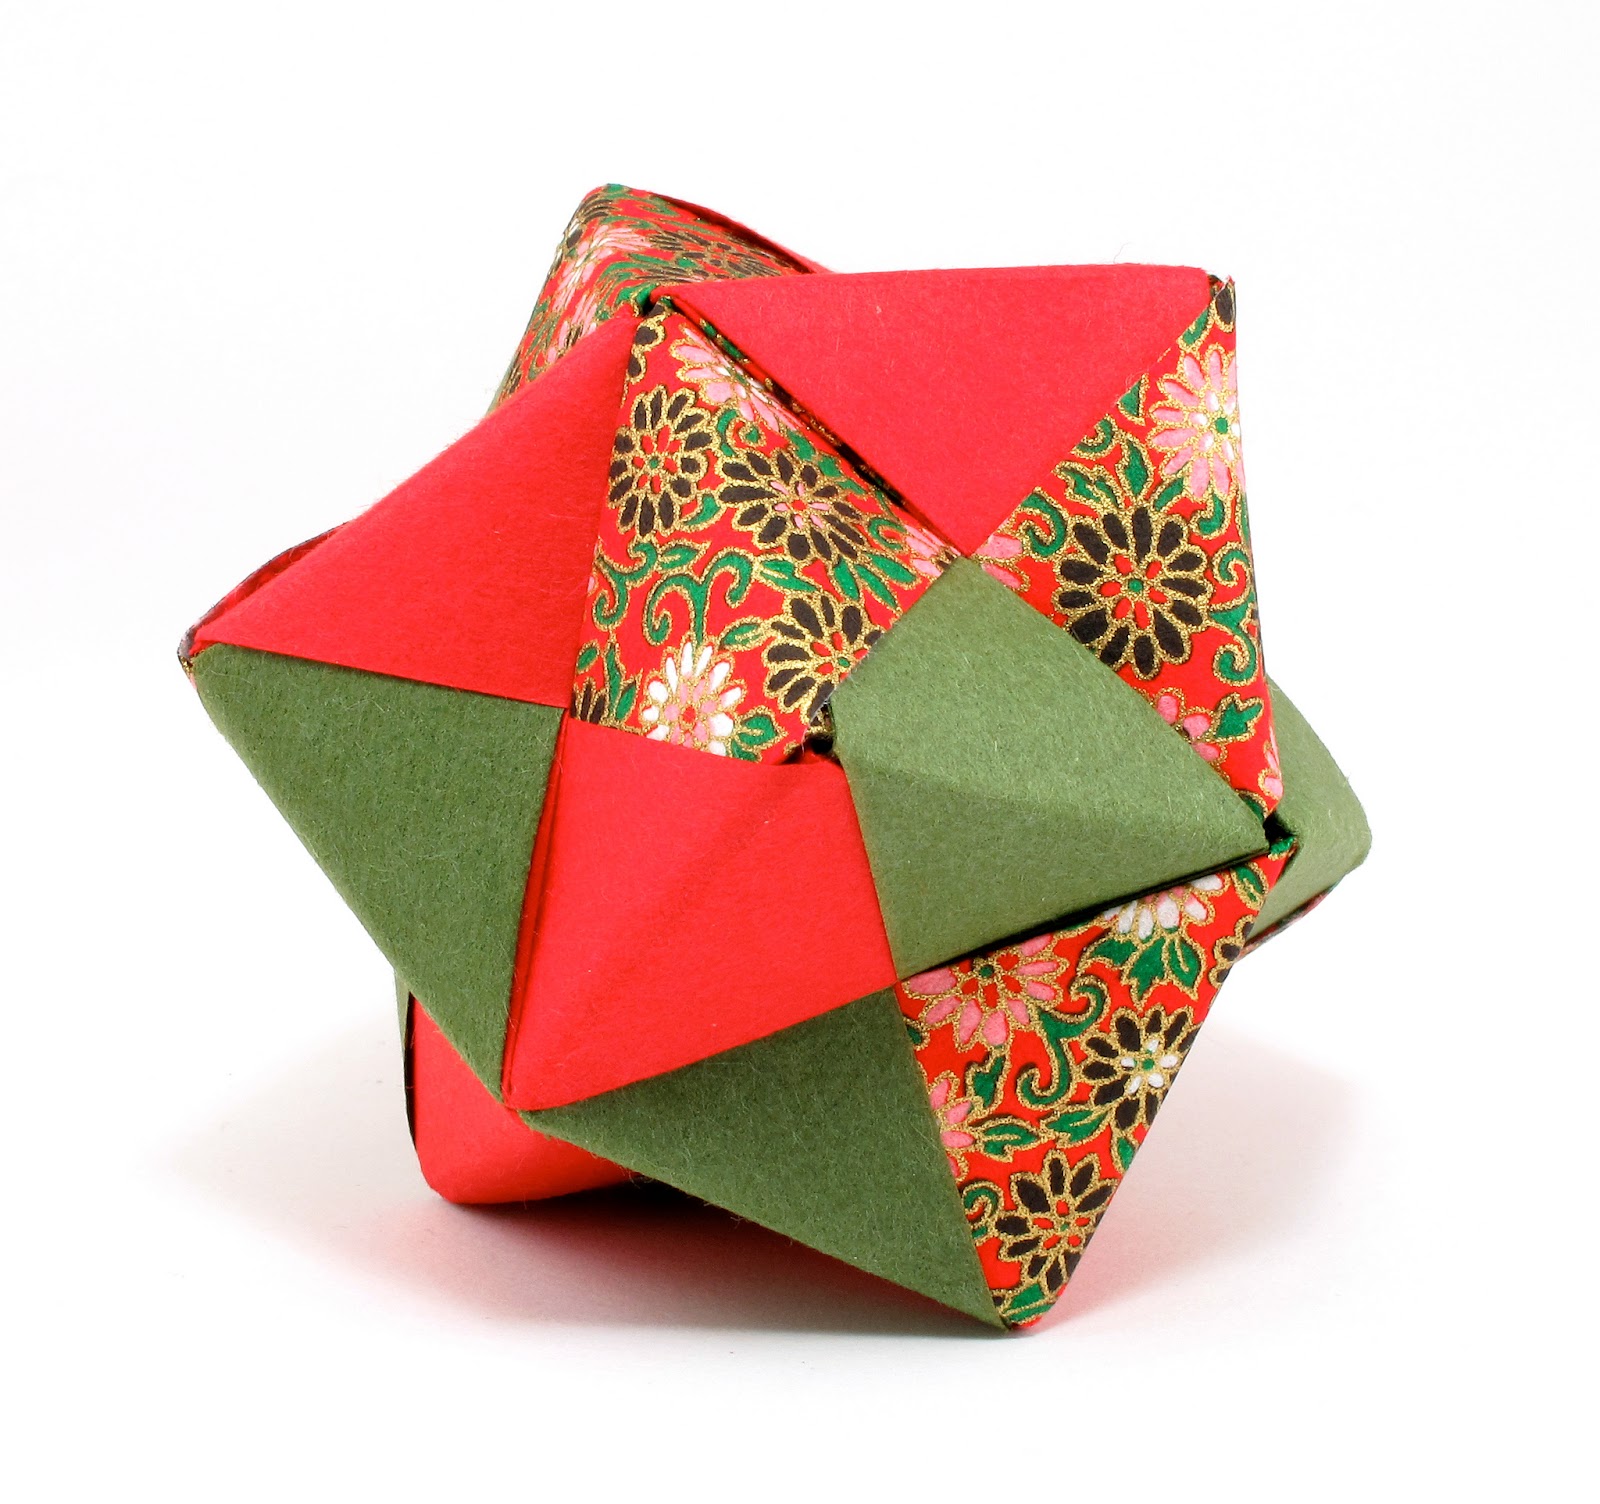 Modular Origami: How to Make a Cube, Octahedron & Icosahedron from